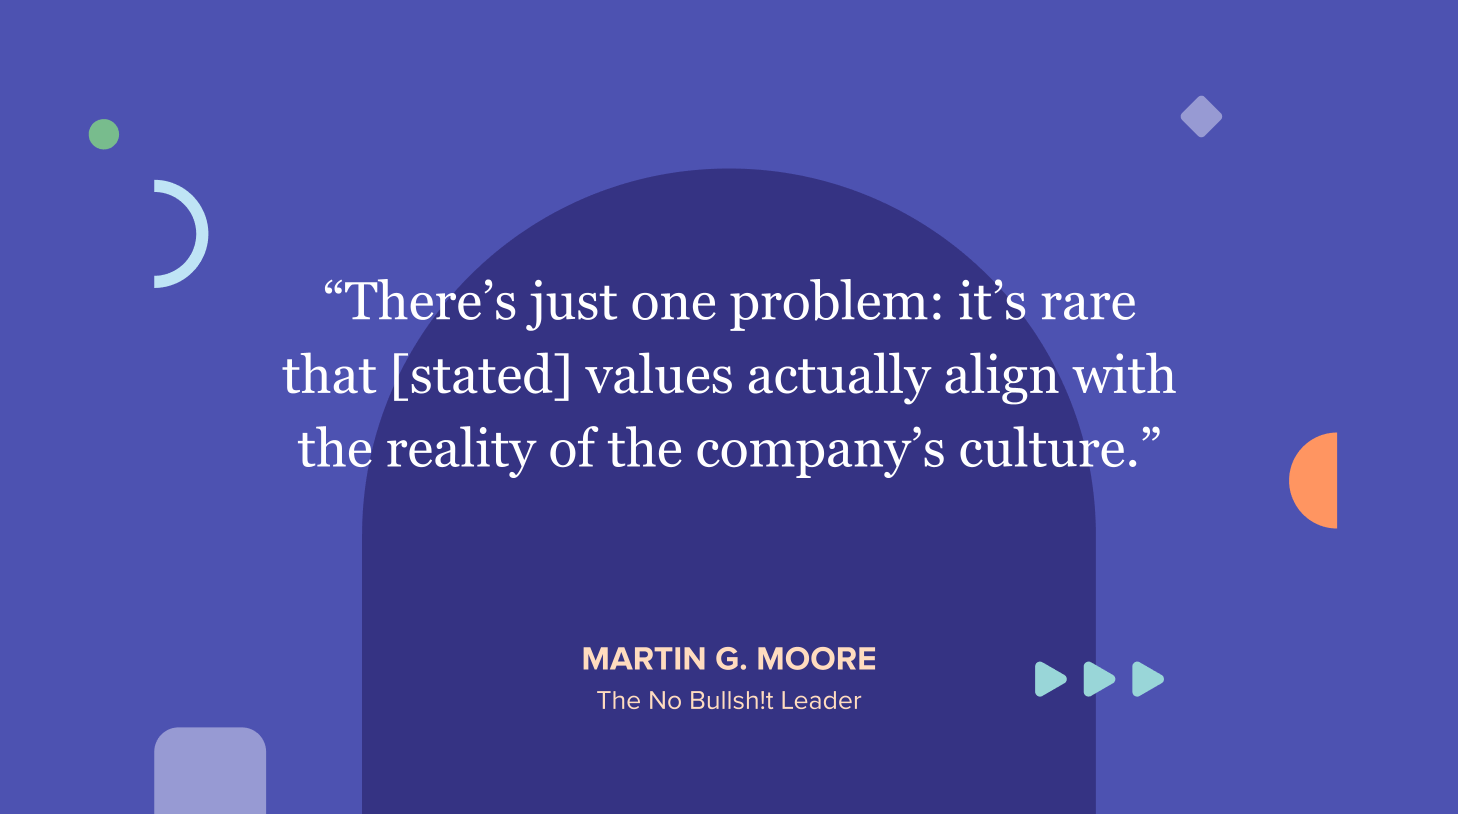 Almost every company has a set of values that adorn its office walls. There’s much talk of the culture these values underpin, and their virtues are extolled in annual reports and investor briefings. There’s just one problem: it’s rare that these aspirational values actually align with the reality of the company’s culture.